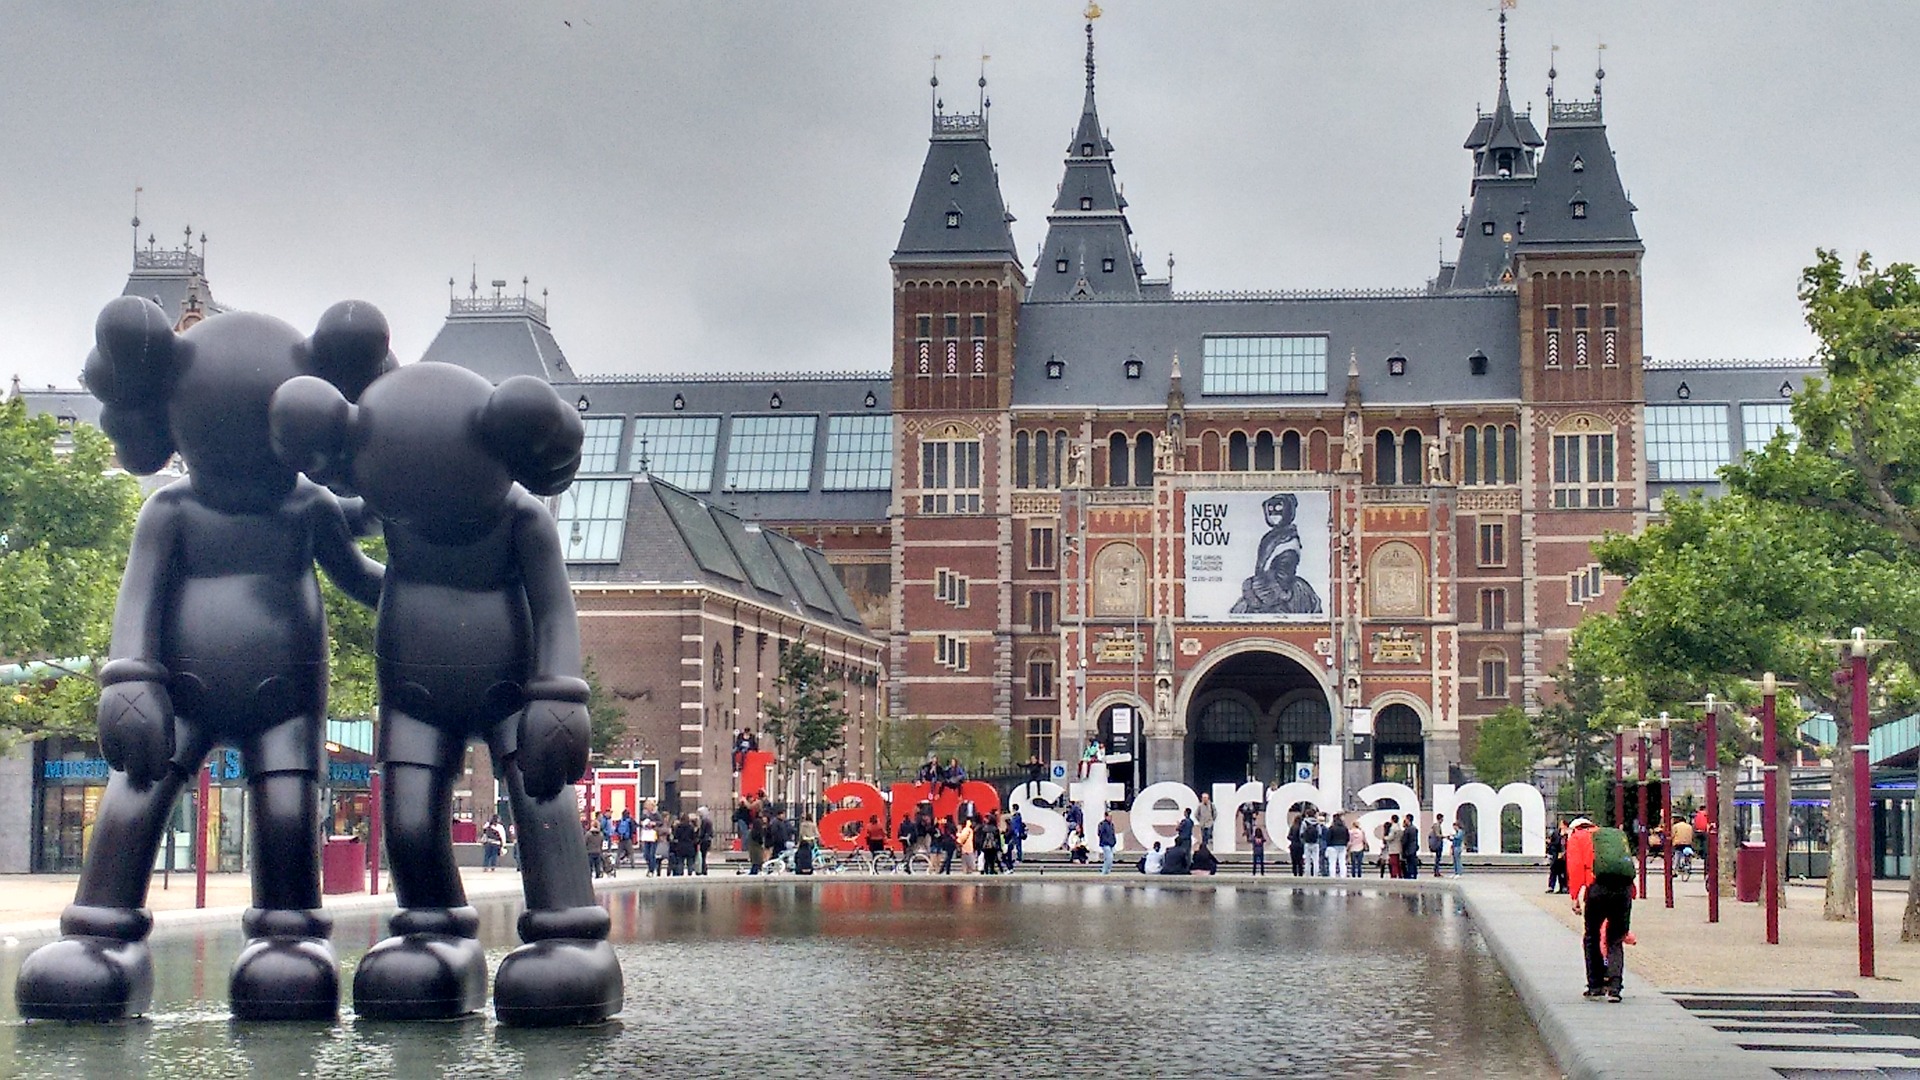 The ‘I Amsterdam’ slogan in front of the Rijksmuseum in Amsterdam.